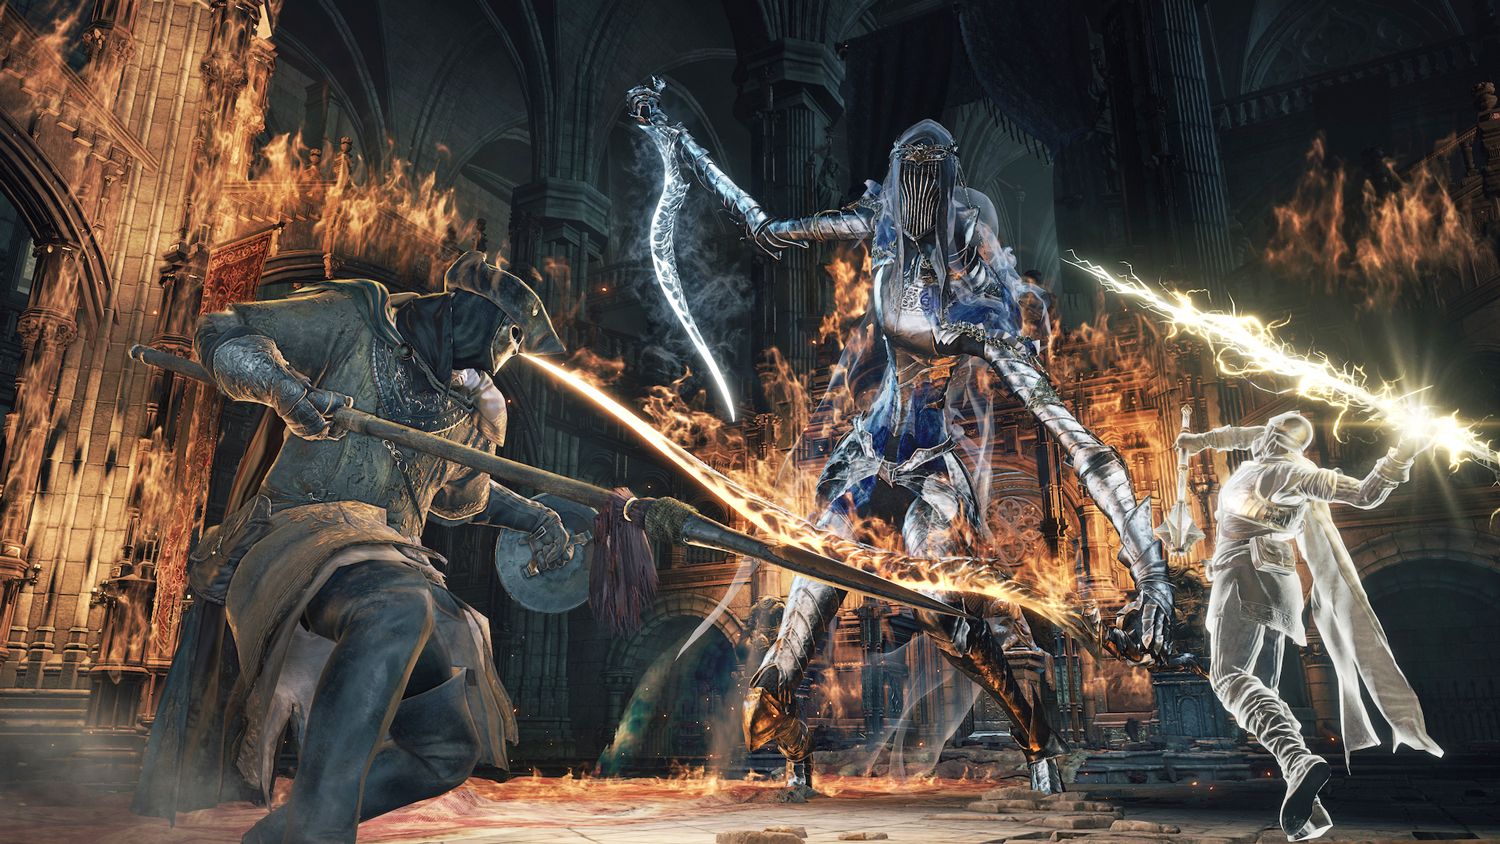 Downloading Dark Souls 3 Early Makes The Game Even Harder Engadget